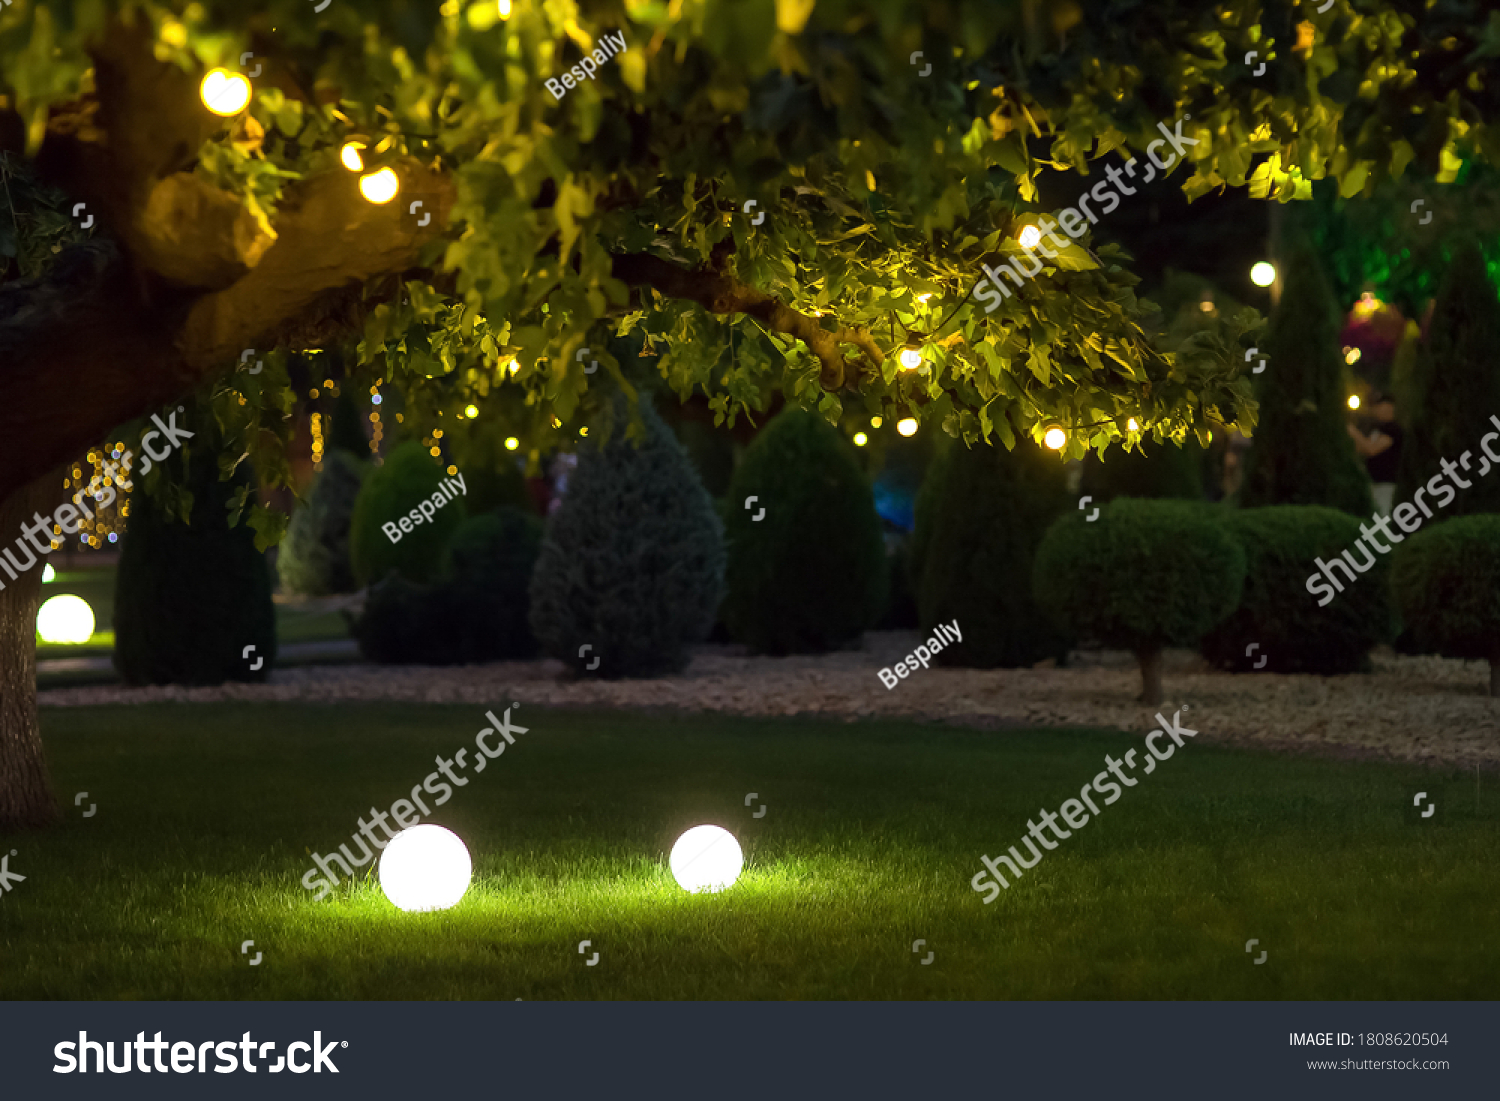 illumination backyard light garden with electric ground lantern with round diffuser lamp with garland of light bulbs on tree branches, dark landscaping park with illuminate night scene, nobody. #1808620504